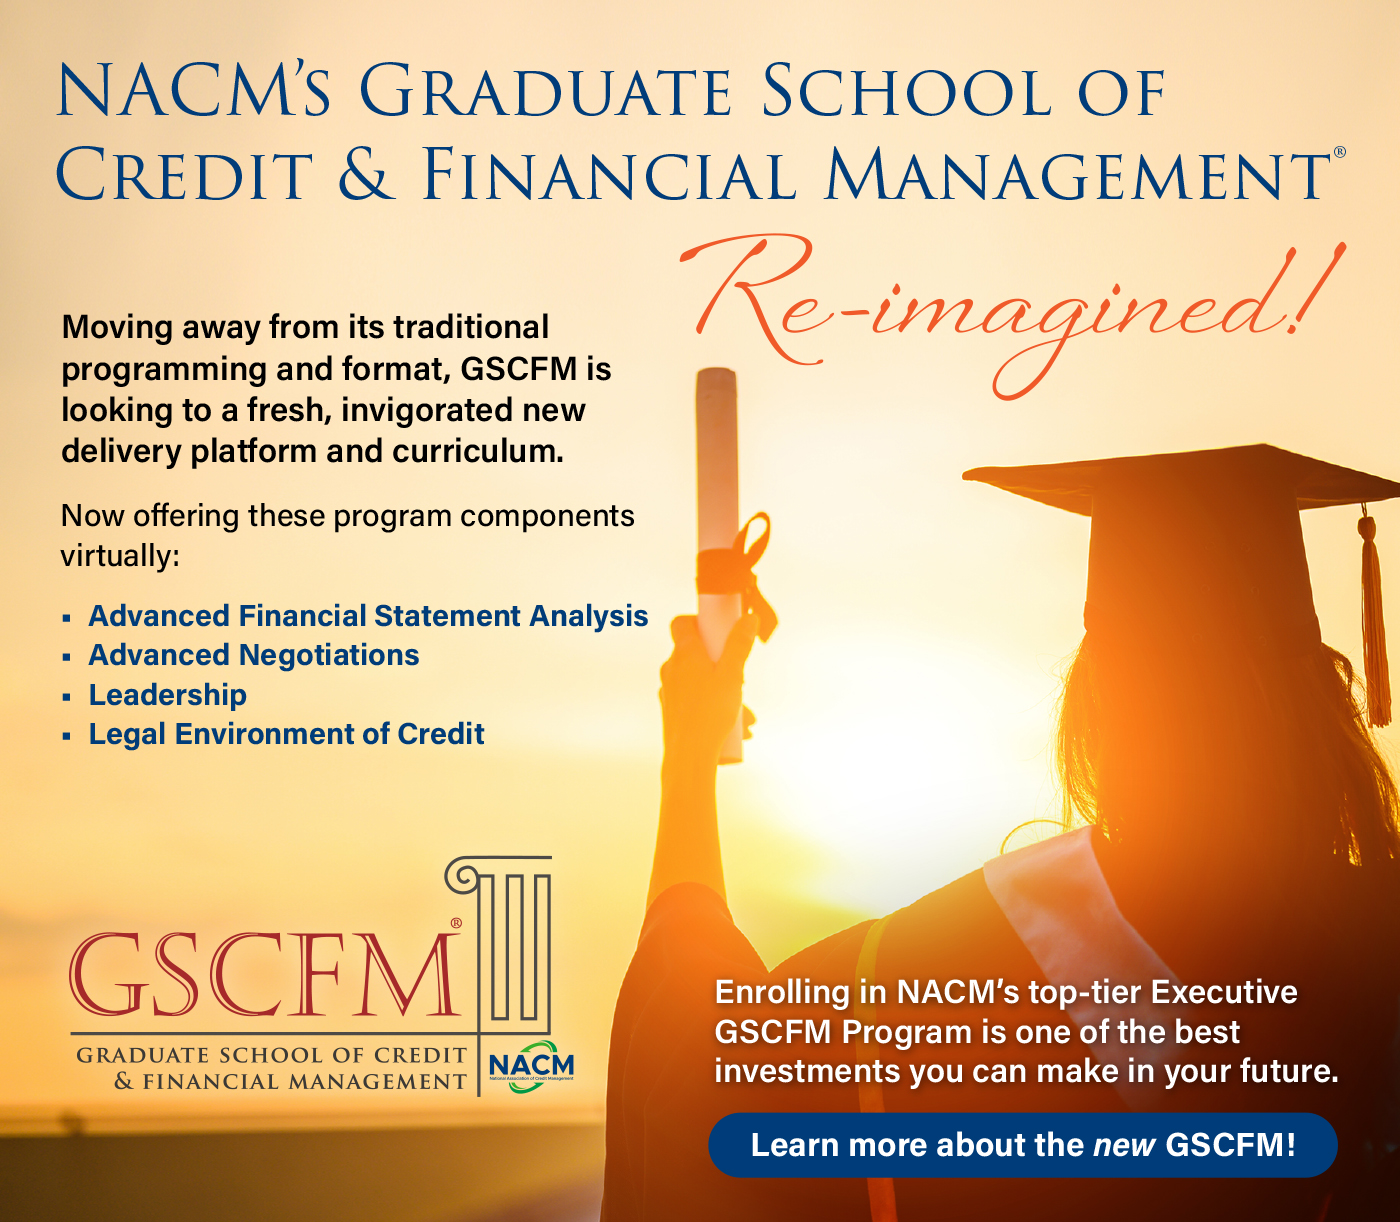 NACM's Graduate School of Credit & Financial Management - Re-imagined - Learn More Today!